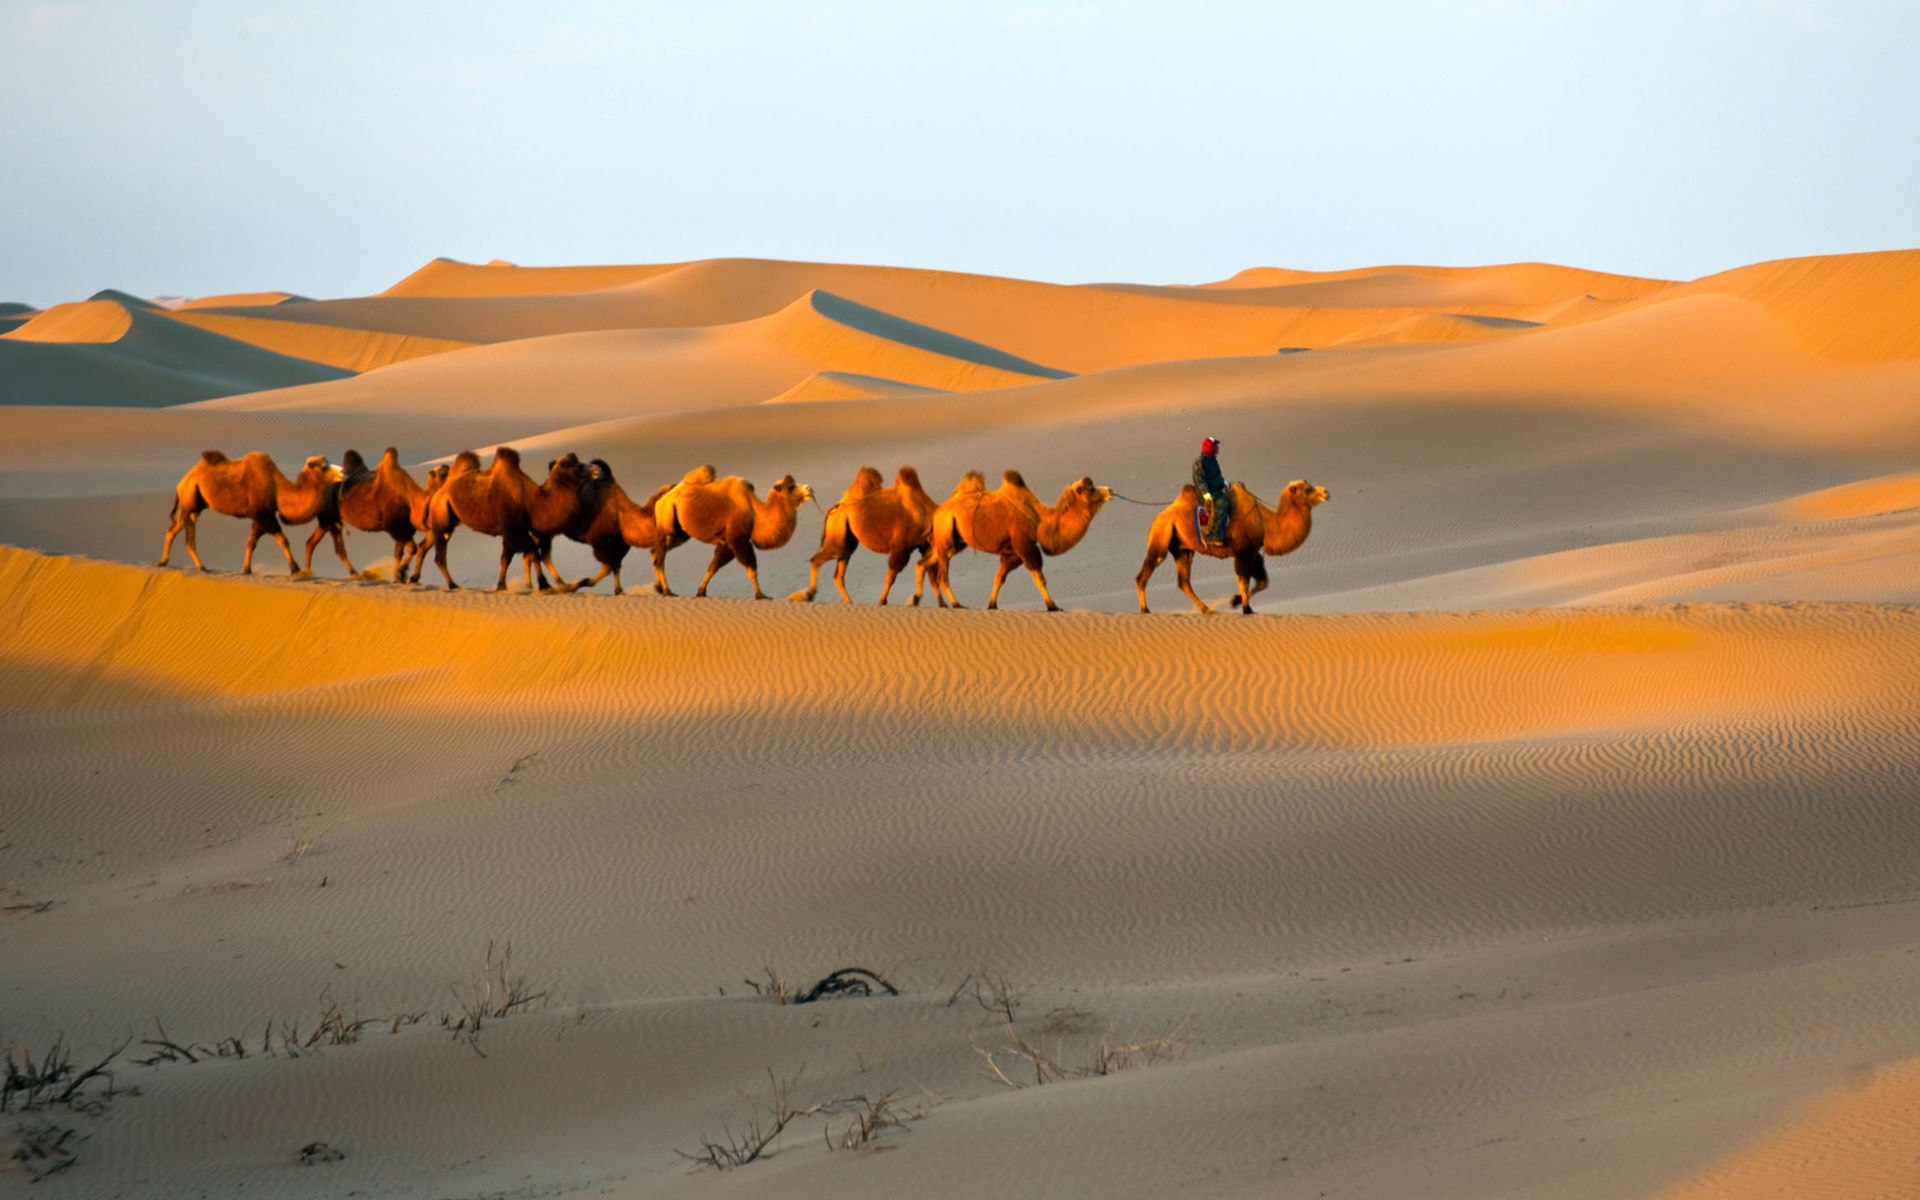 The Grand Tour along the Silk Road, from Xi'an to Kashgar (19 days)